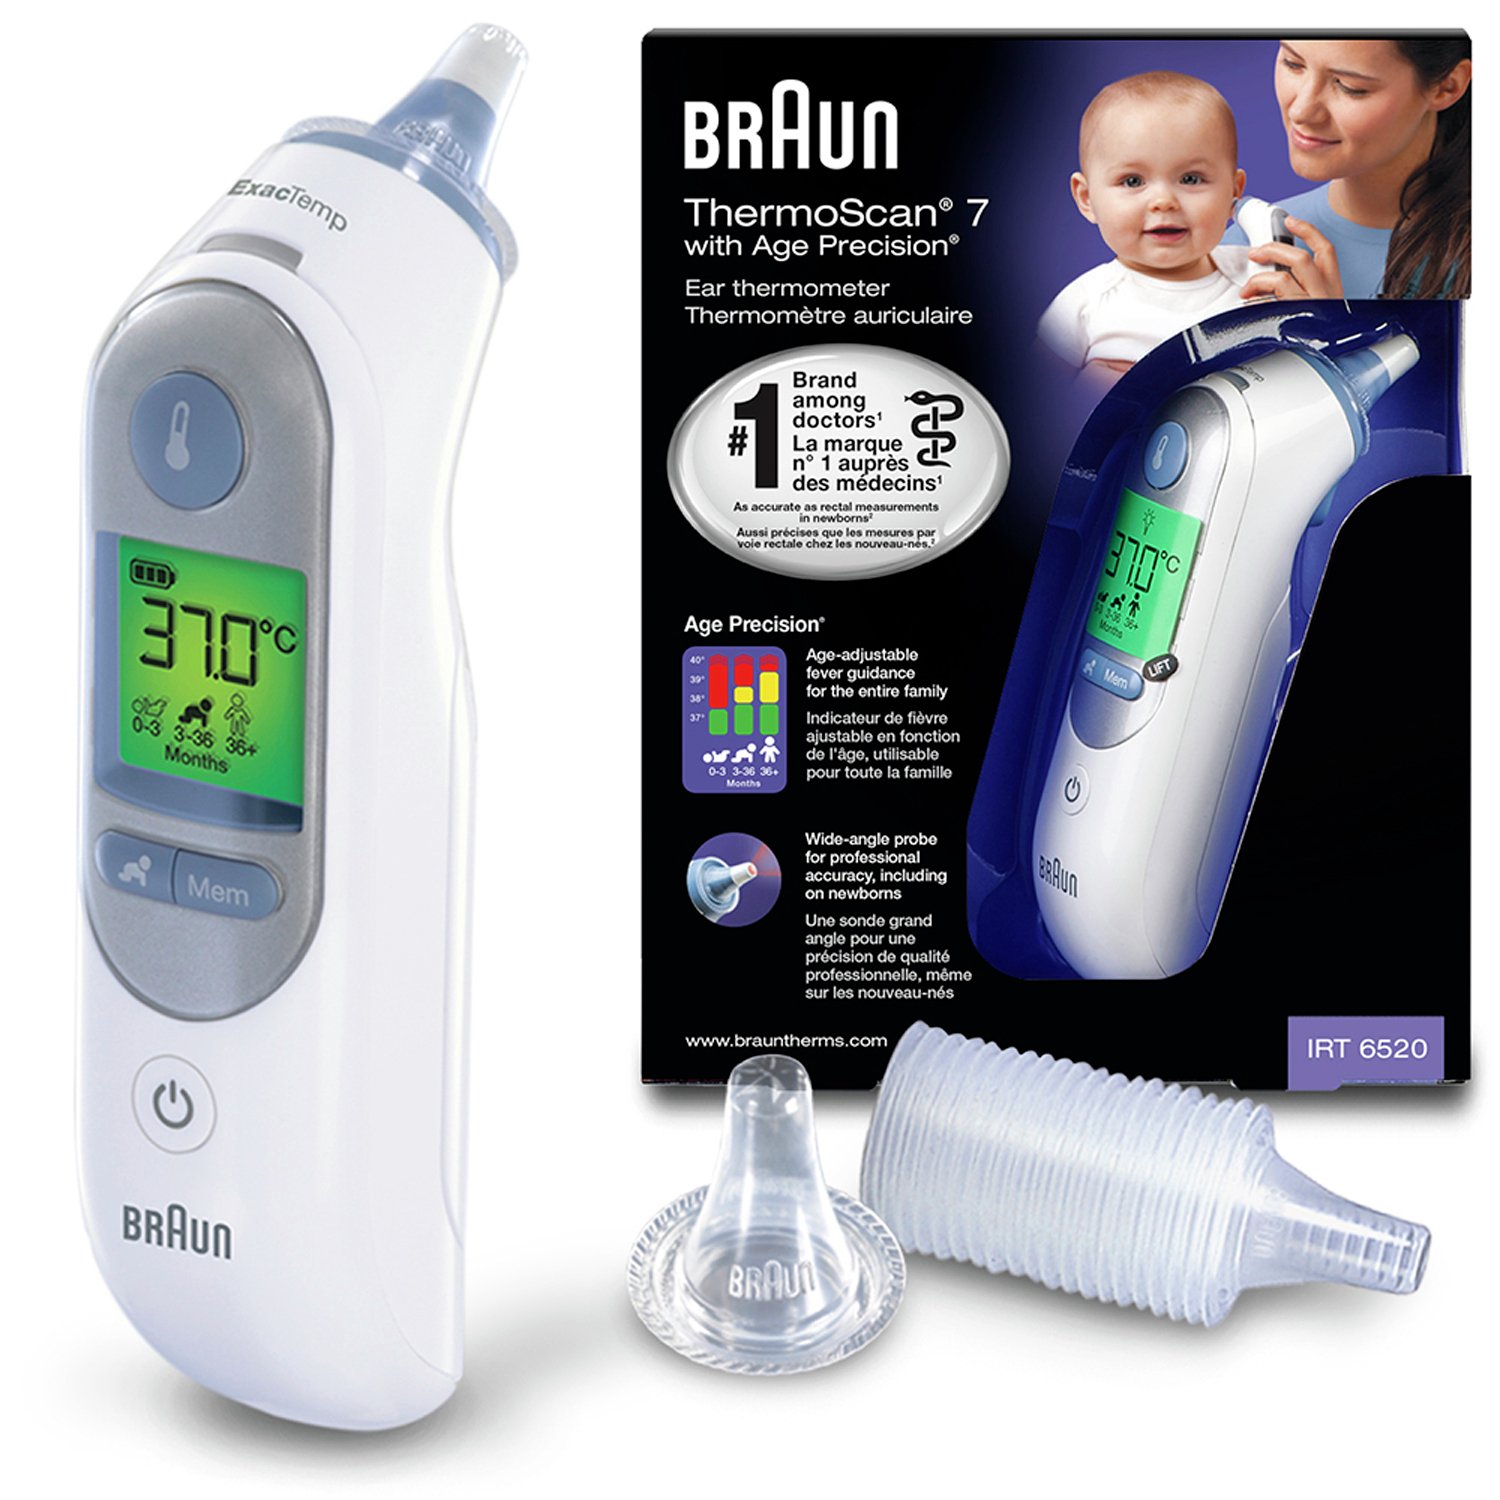 Braun ThermoScan 7 Ear Thermometer with Age Precision review